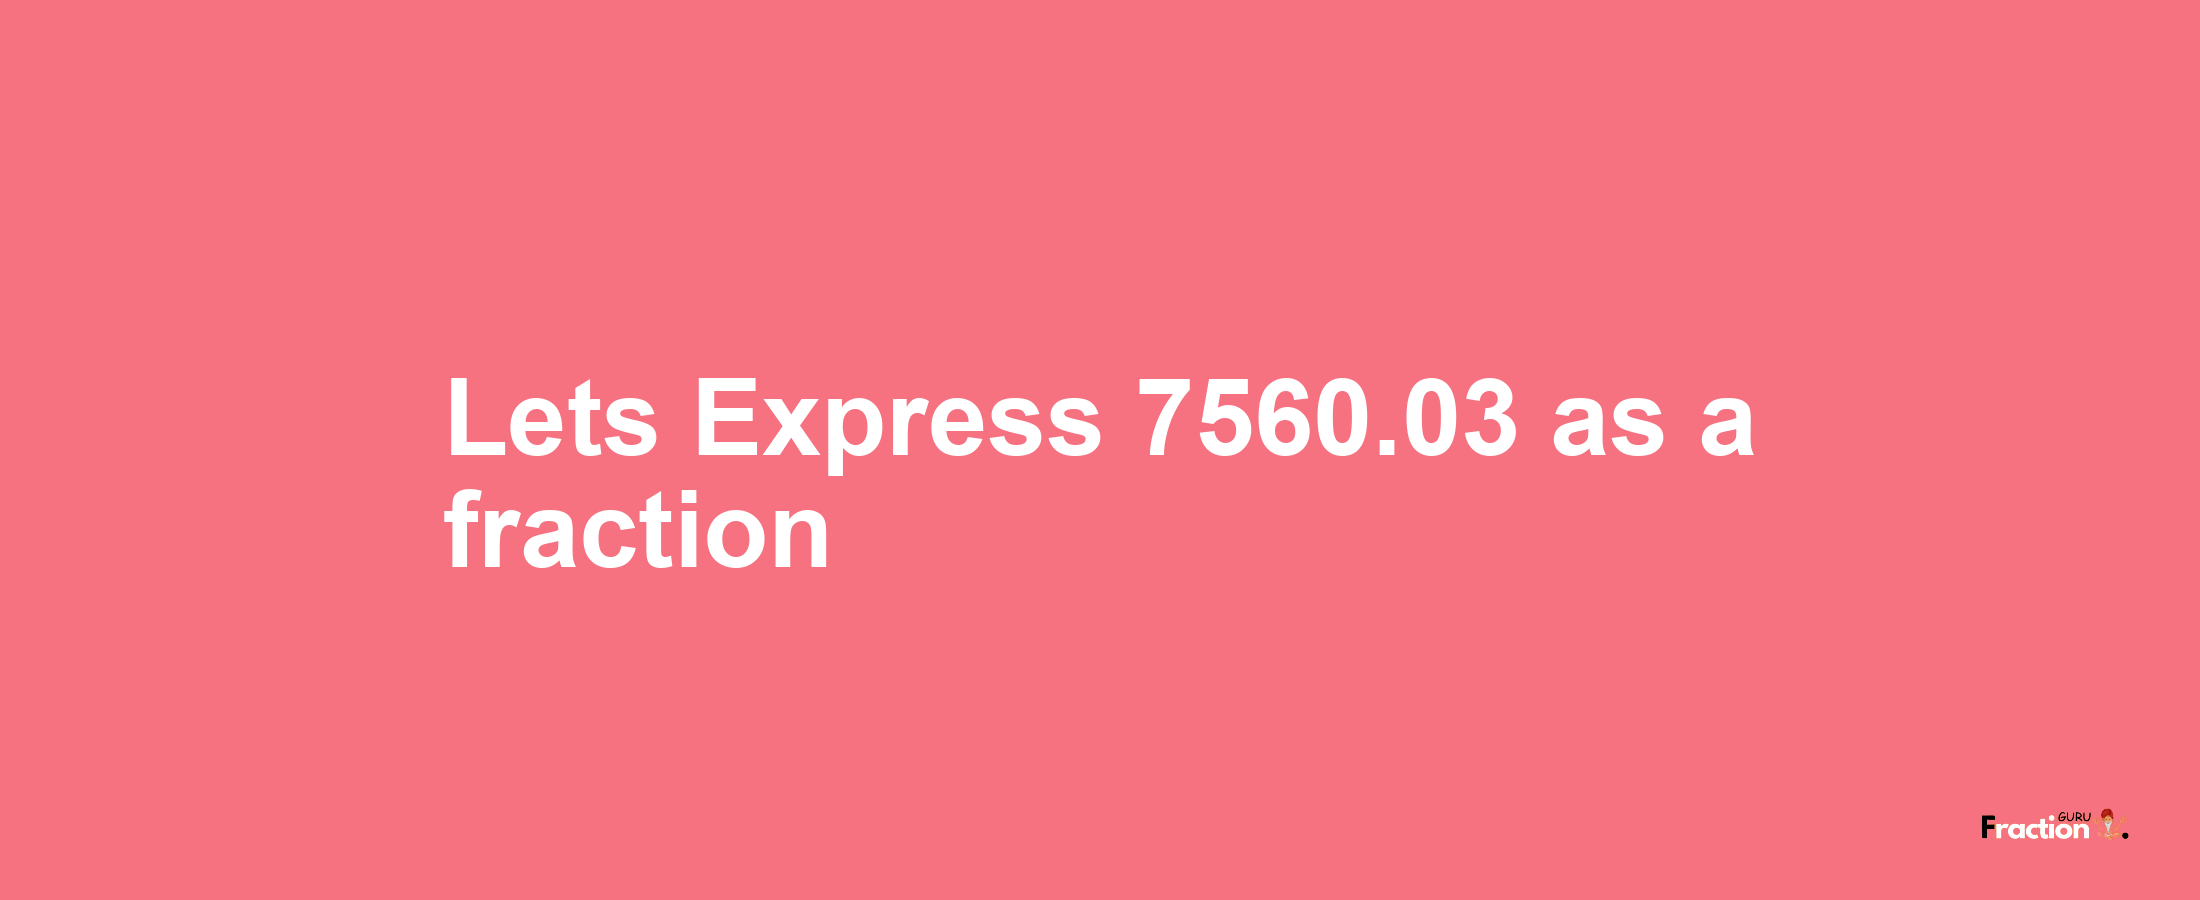 Lets Express 7560.03 as afraction